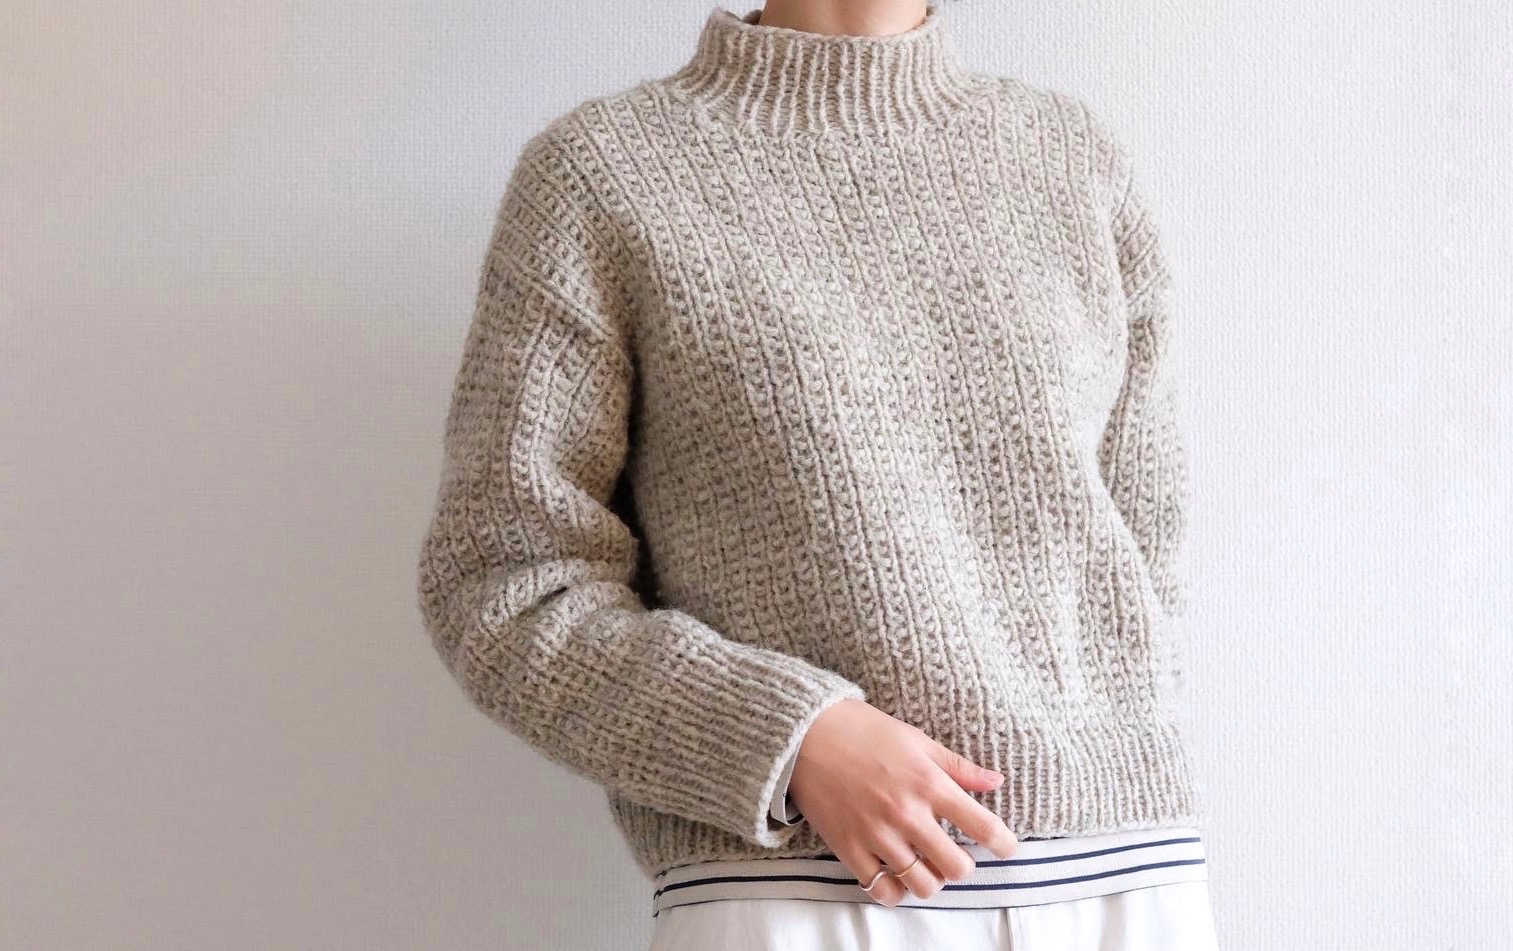 “Lopi Sweater” by HELLO, HYGGE LIFE